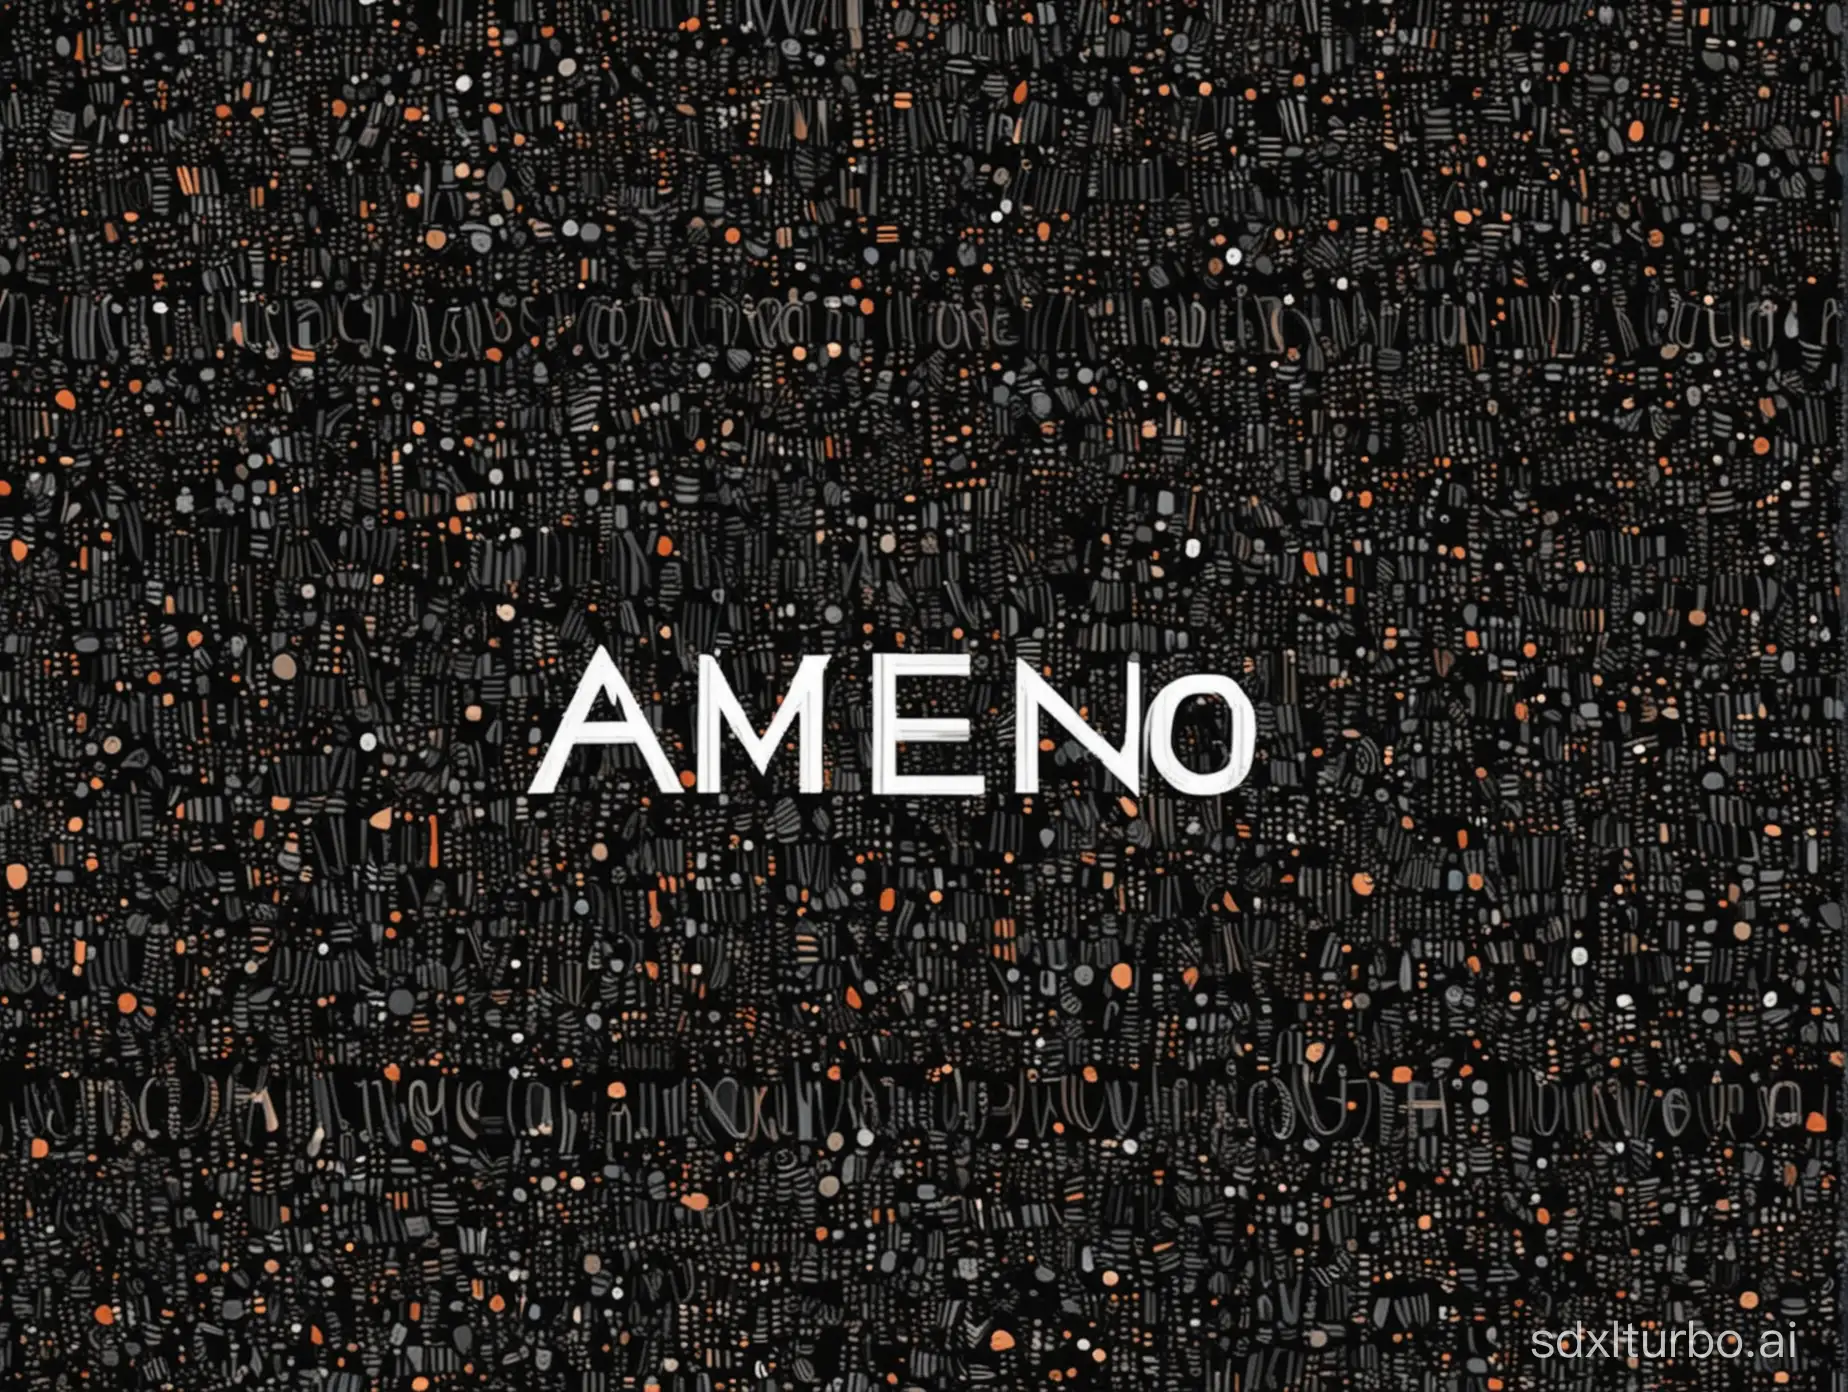 generate a blog homepage picture blog name:Ameno blog,background color is black,The pattern should be simple and abstract.The word amene blog needs to be emphasized.
